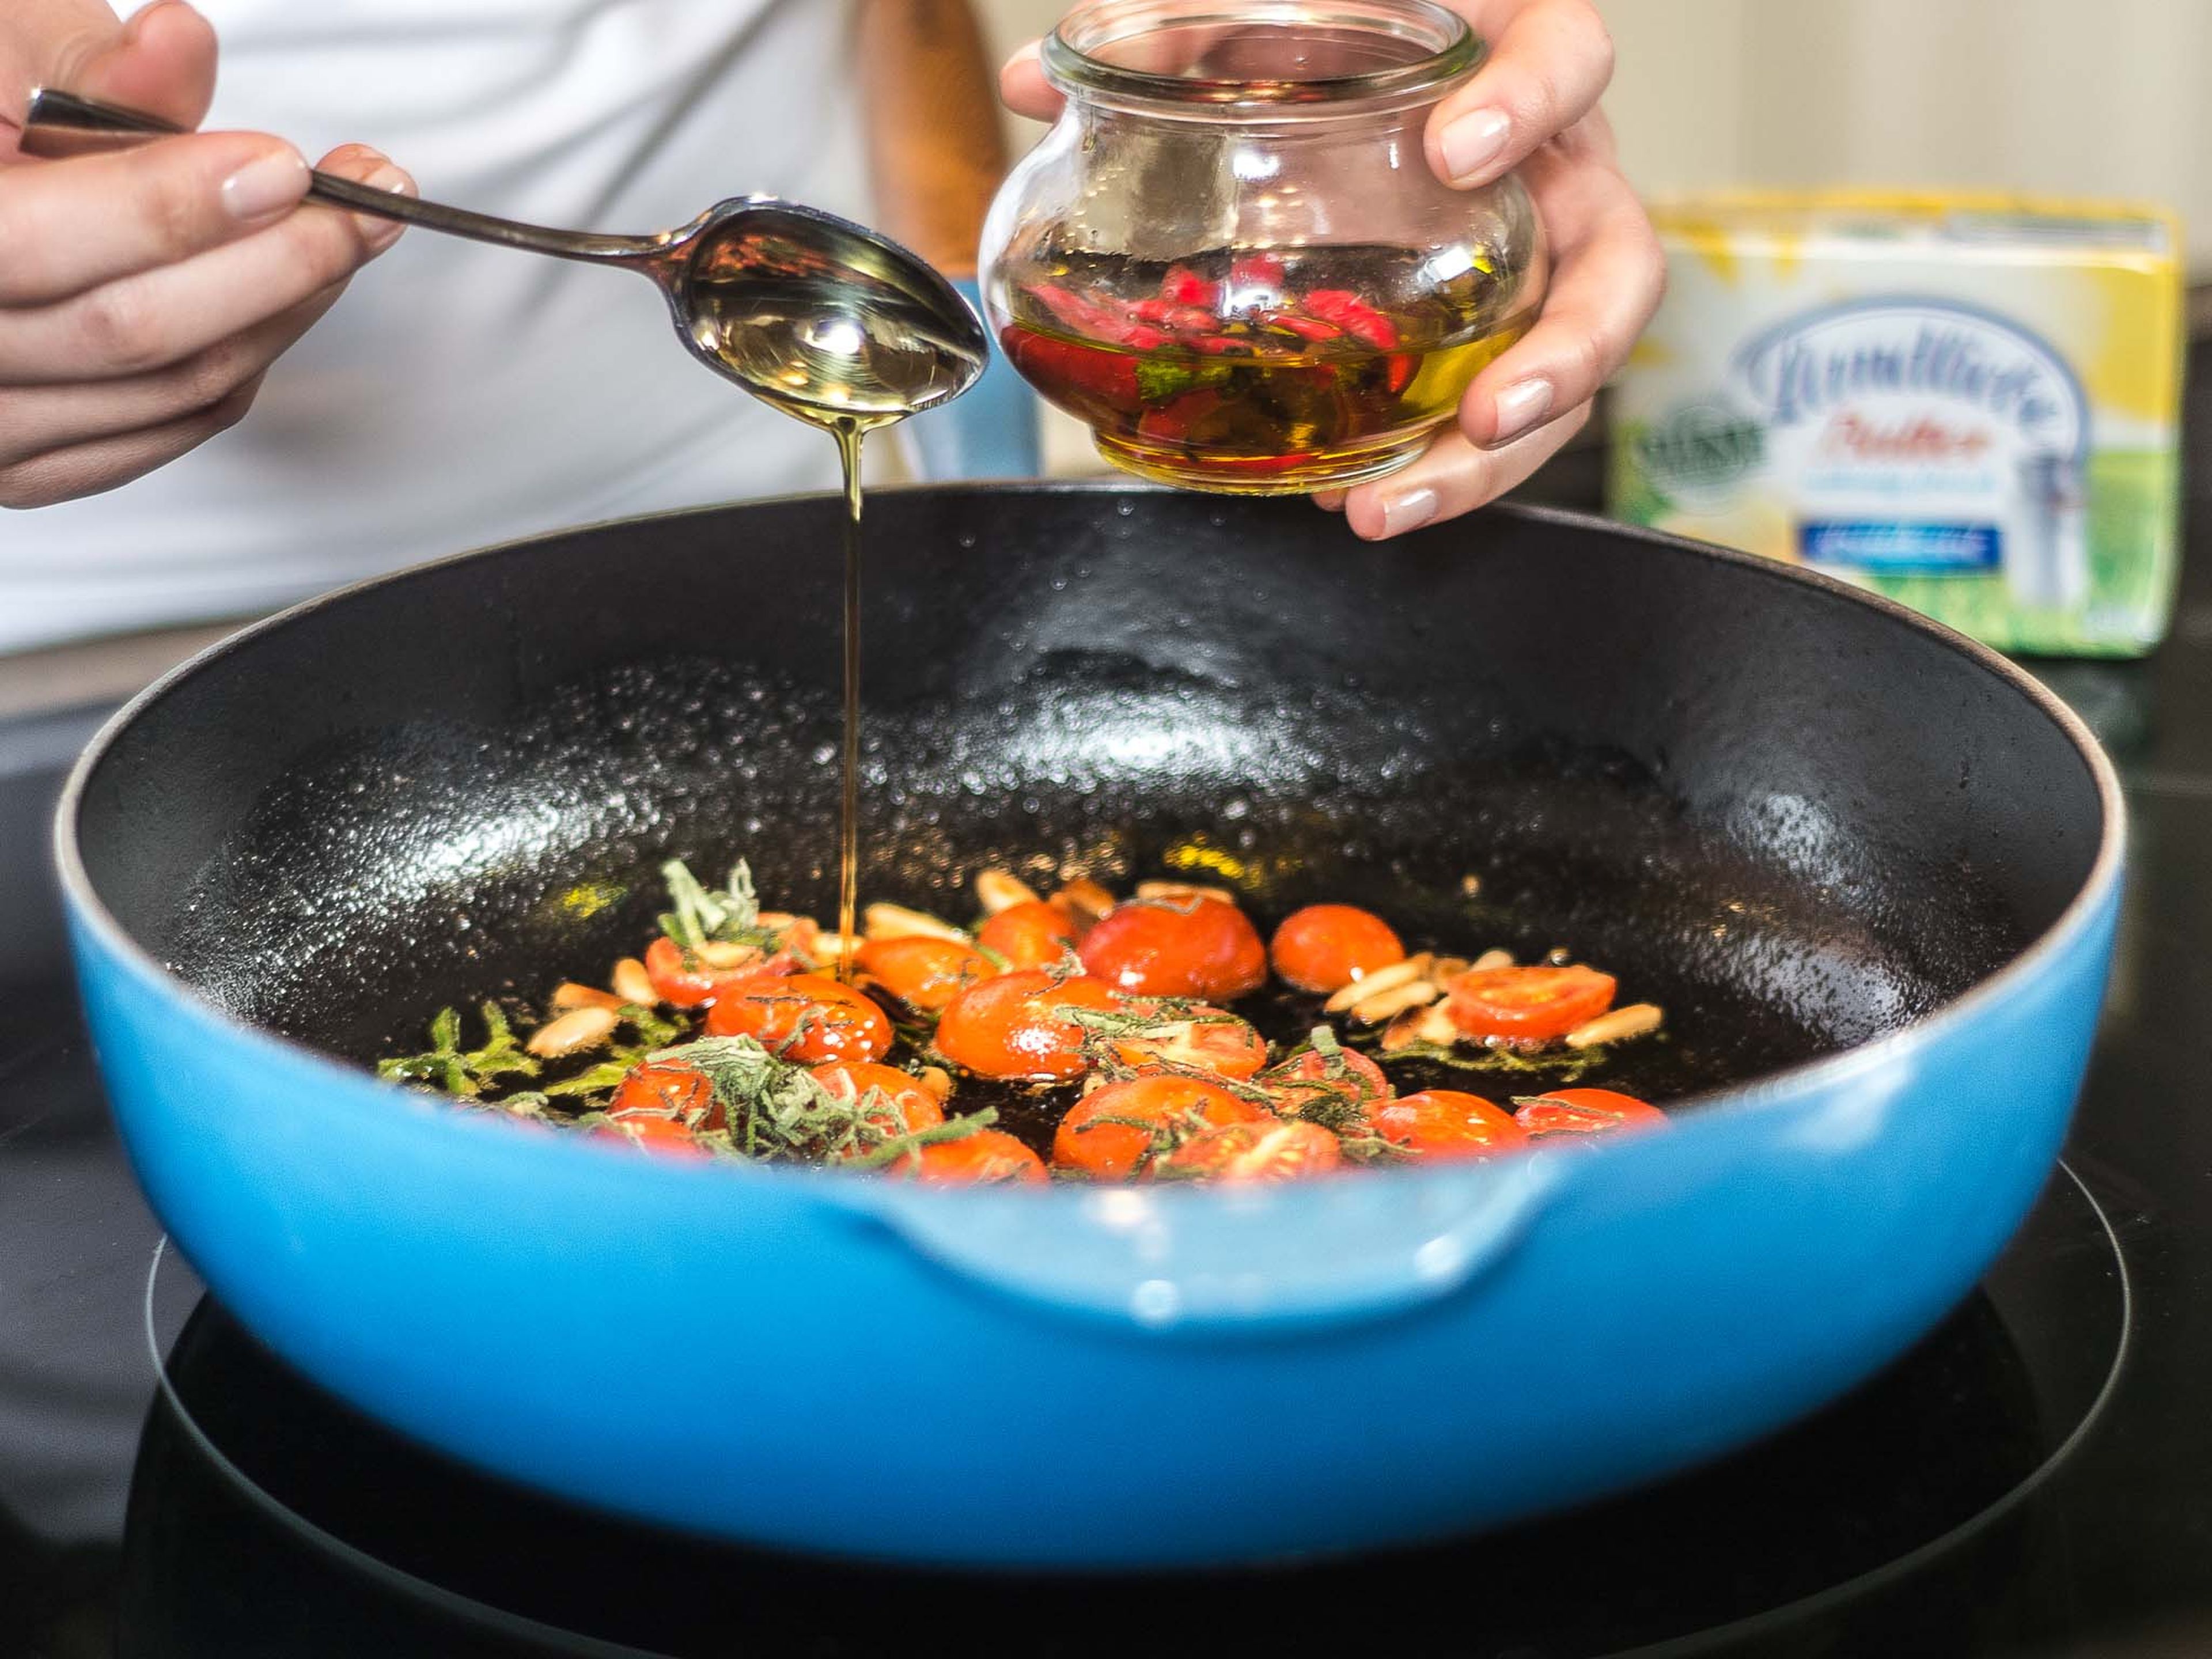 Melt butter in a large frying pan. Add sage, cherry tomatoes, pine nuts, and chili oil and fry. Season lightly with salt and pepper.